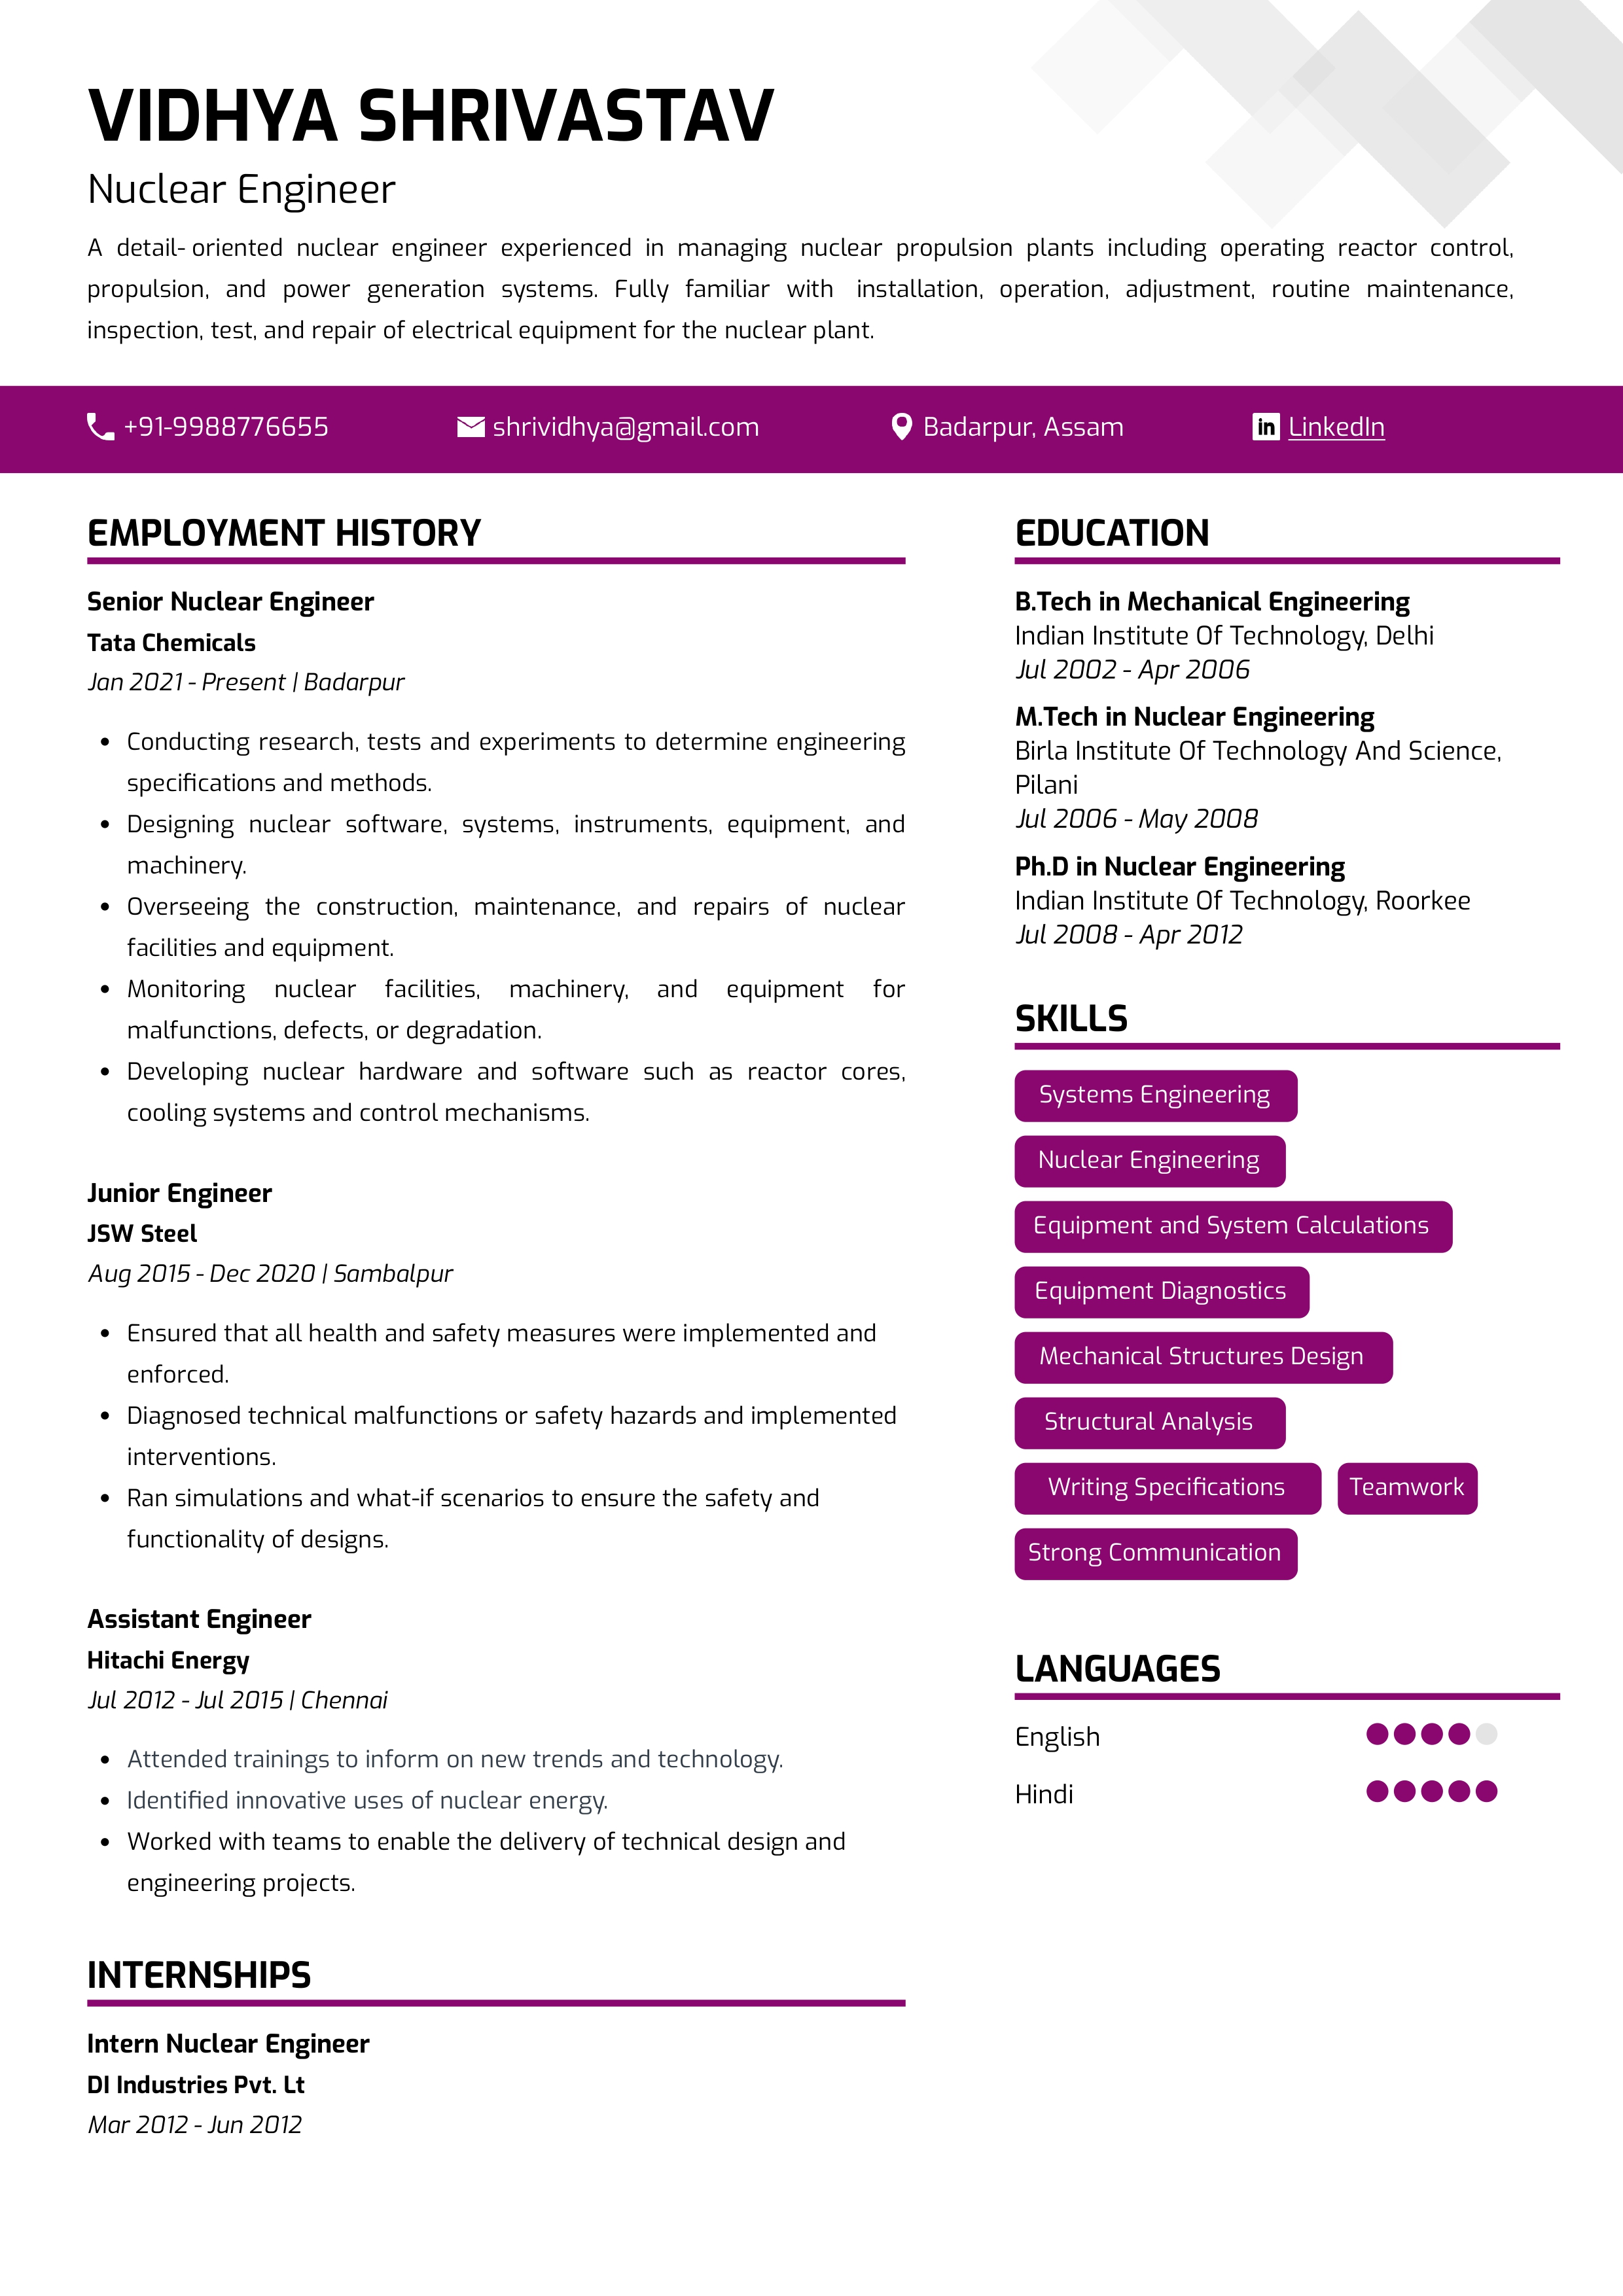 Sample Resume of Nuclear Engineer1 | Free Resume Templates & Samples on Resumod.co